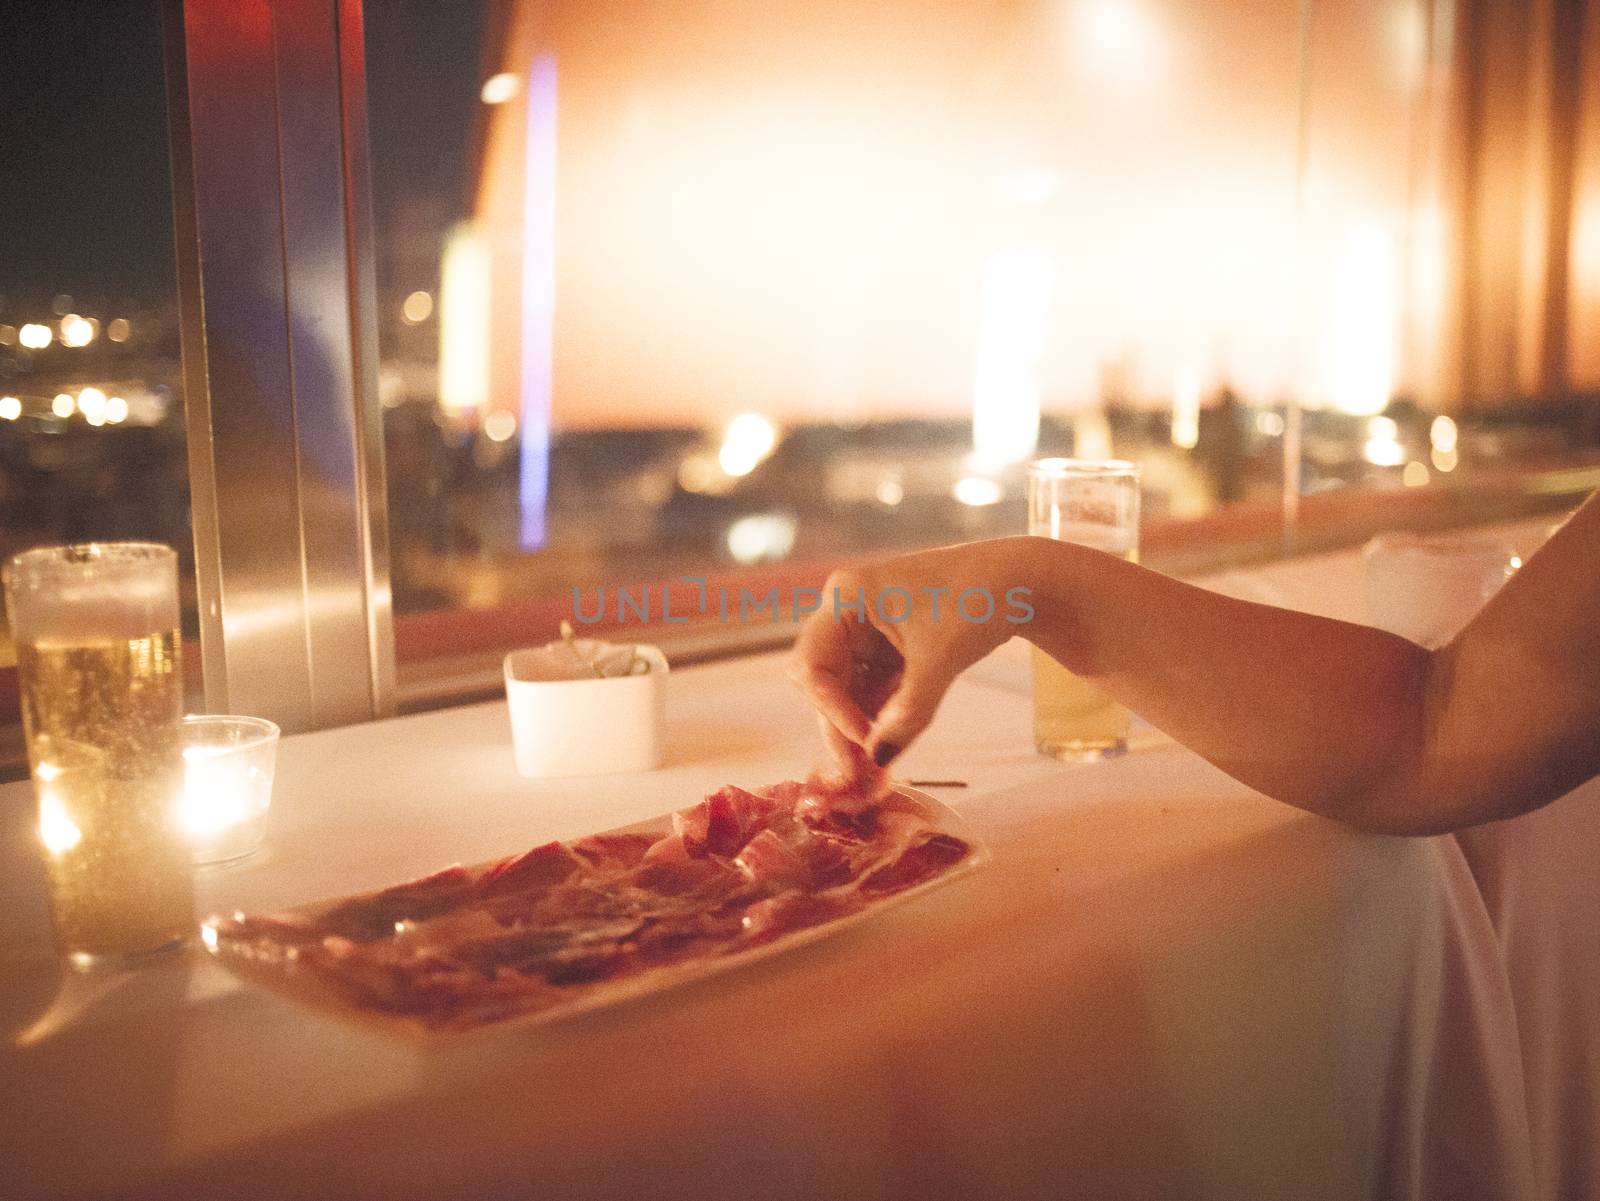 Color artistic digital rectangular horizontal photo of the hand of a woman taking piece of Spanish hand cut Iberian cured acorn fed black foot pig ham "Jamon iberico de pura bellota de pata negra" from plate of prosciutto style cured ham in Spanish wedding banquet marriage buffet party at night with window and city out of focus in defocused background. 